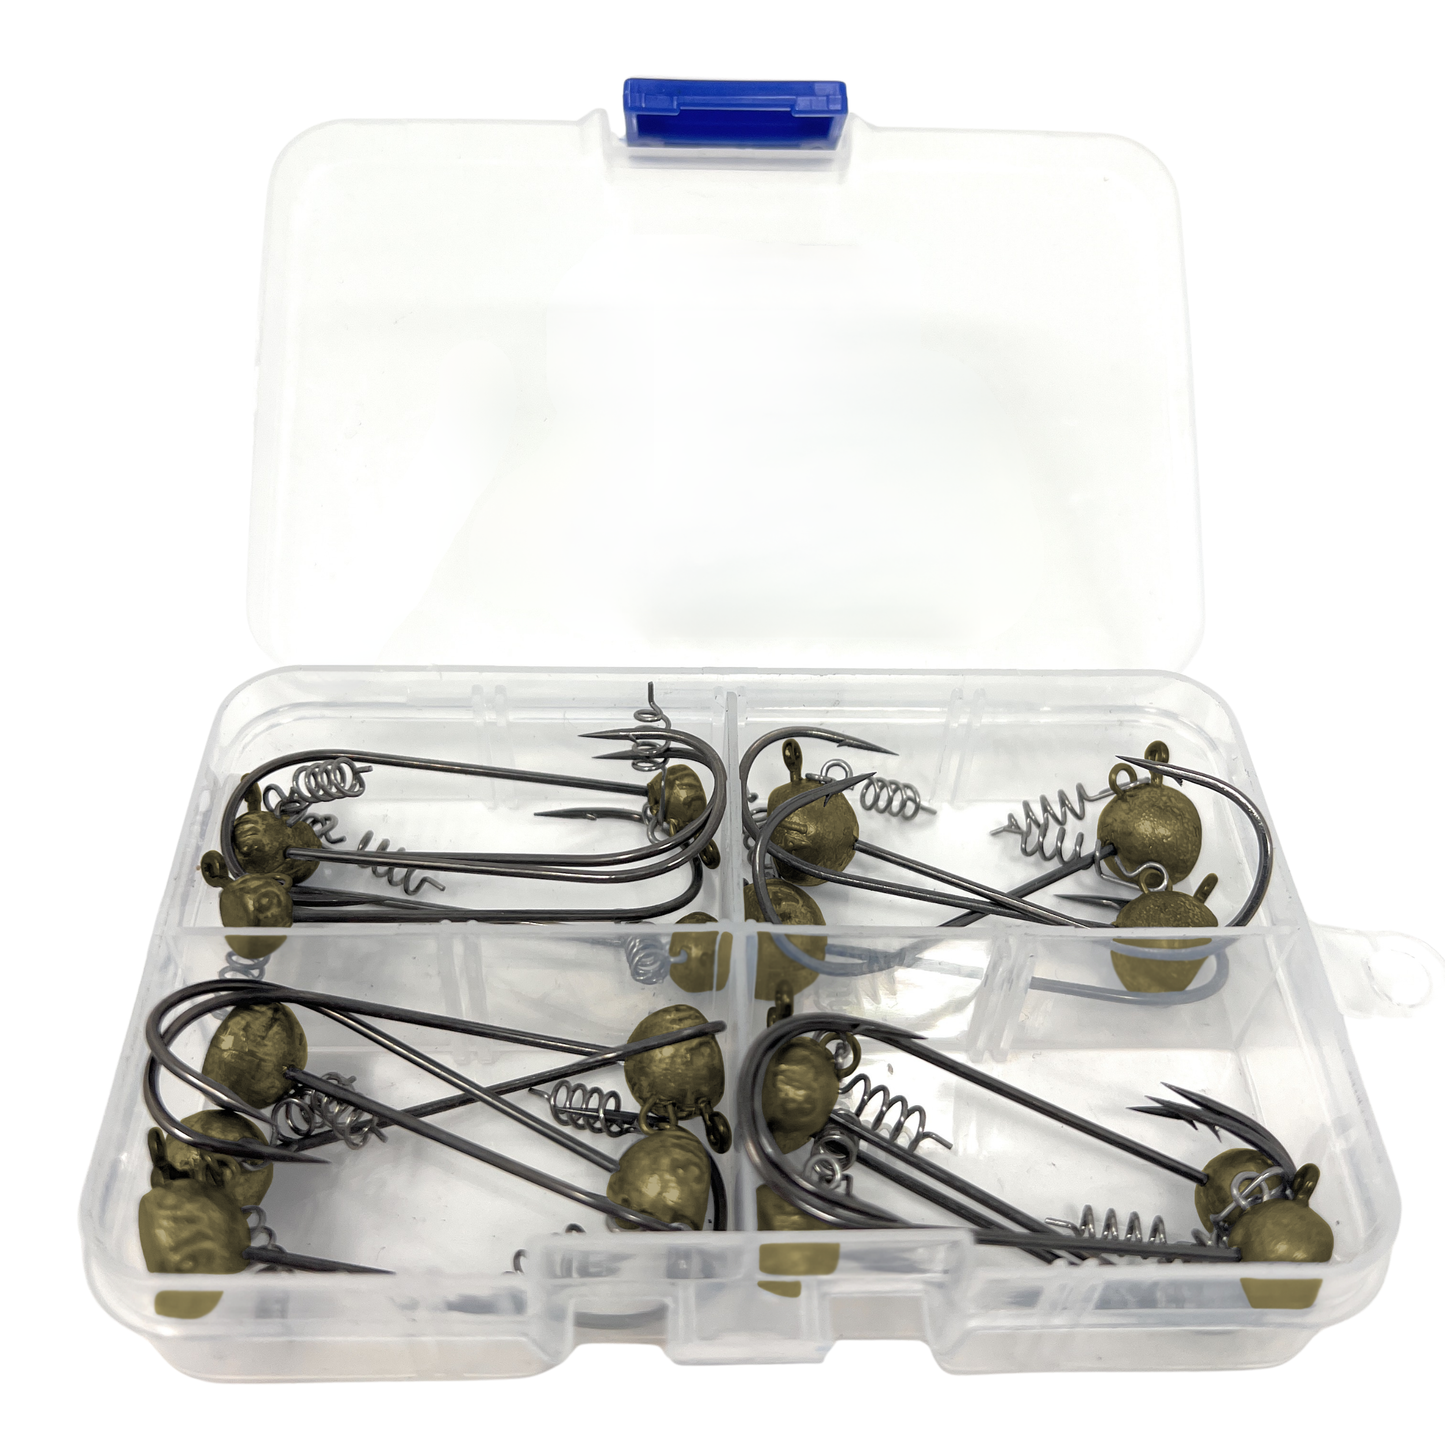 Reaction Tackle Stand-Up Shaky Head Jigs (10 pack)